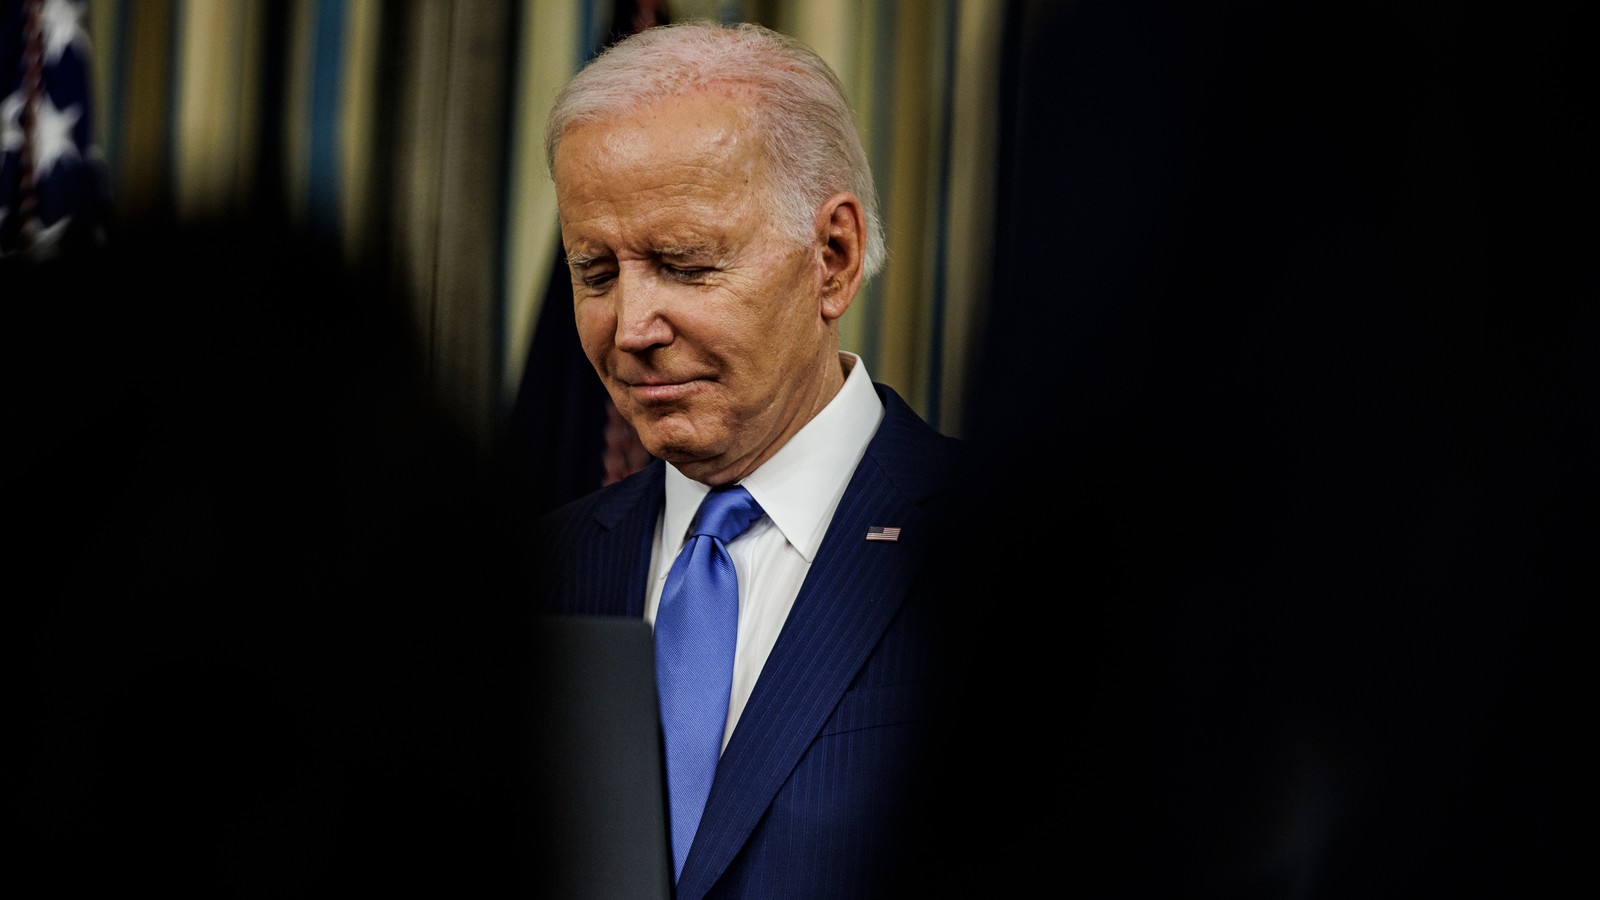 Biden losing popularity with Latino adults as Trump gains, poll shows